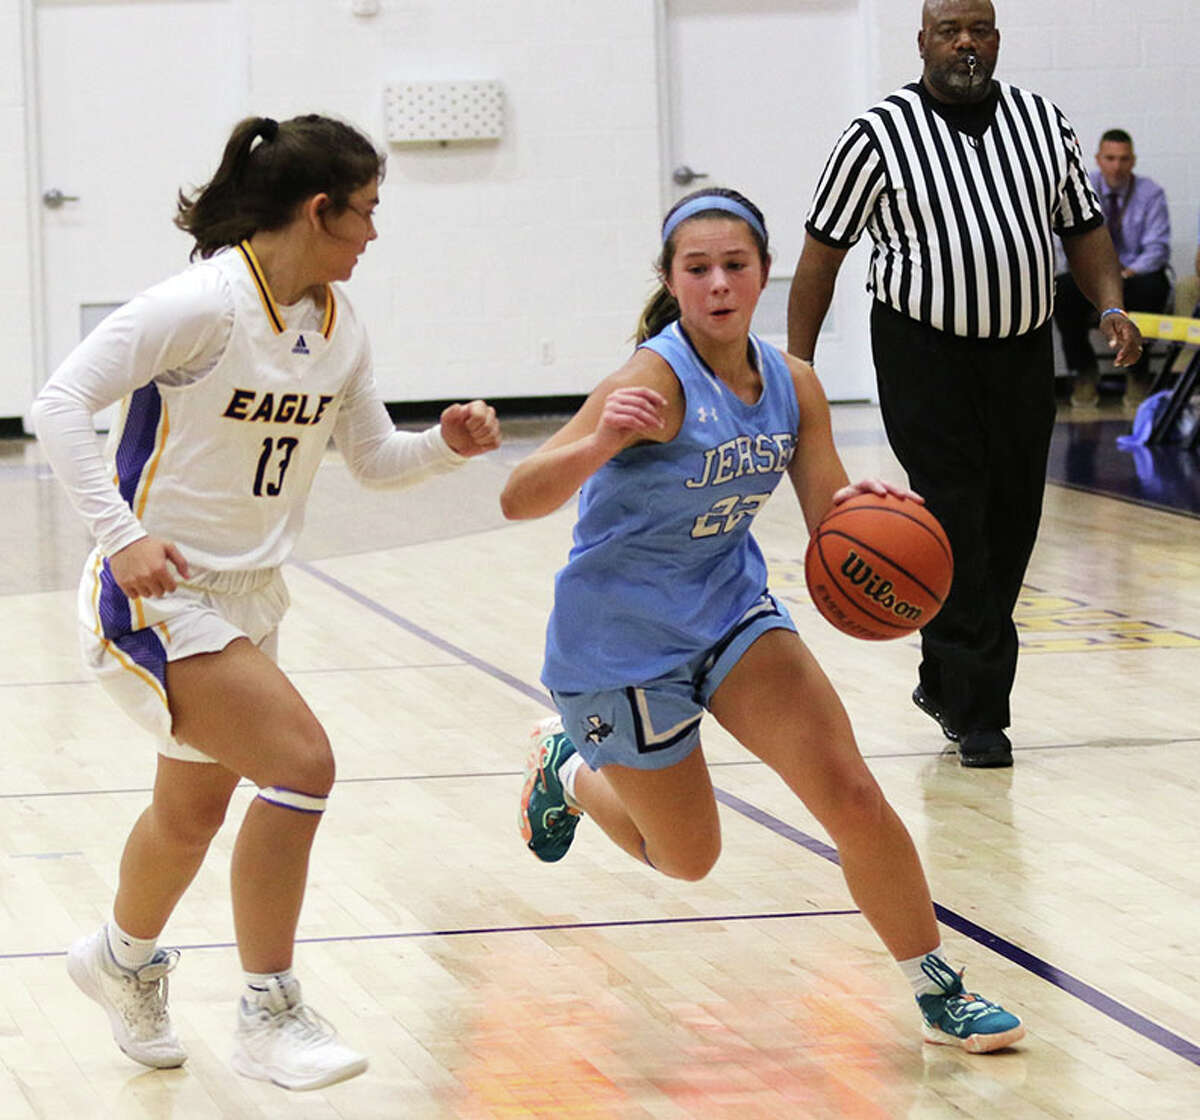 Jersey's Tessa Crawford scored 28 points to lead the Panthers past Ursuline Academy 44-39 in the championship game of the Duchesne Holiday Tournament Thursday in St. Charles, Mo. She is shown in action earlier this season against CM.